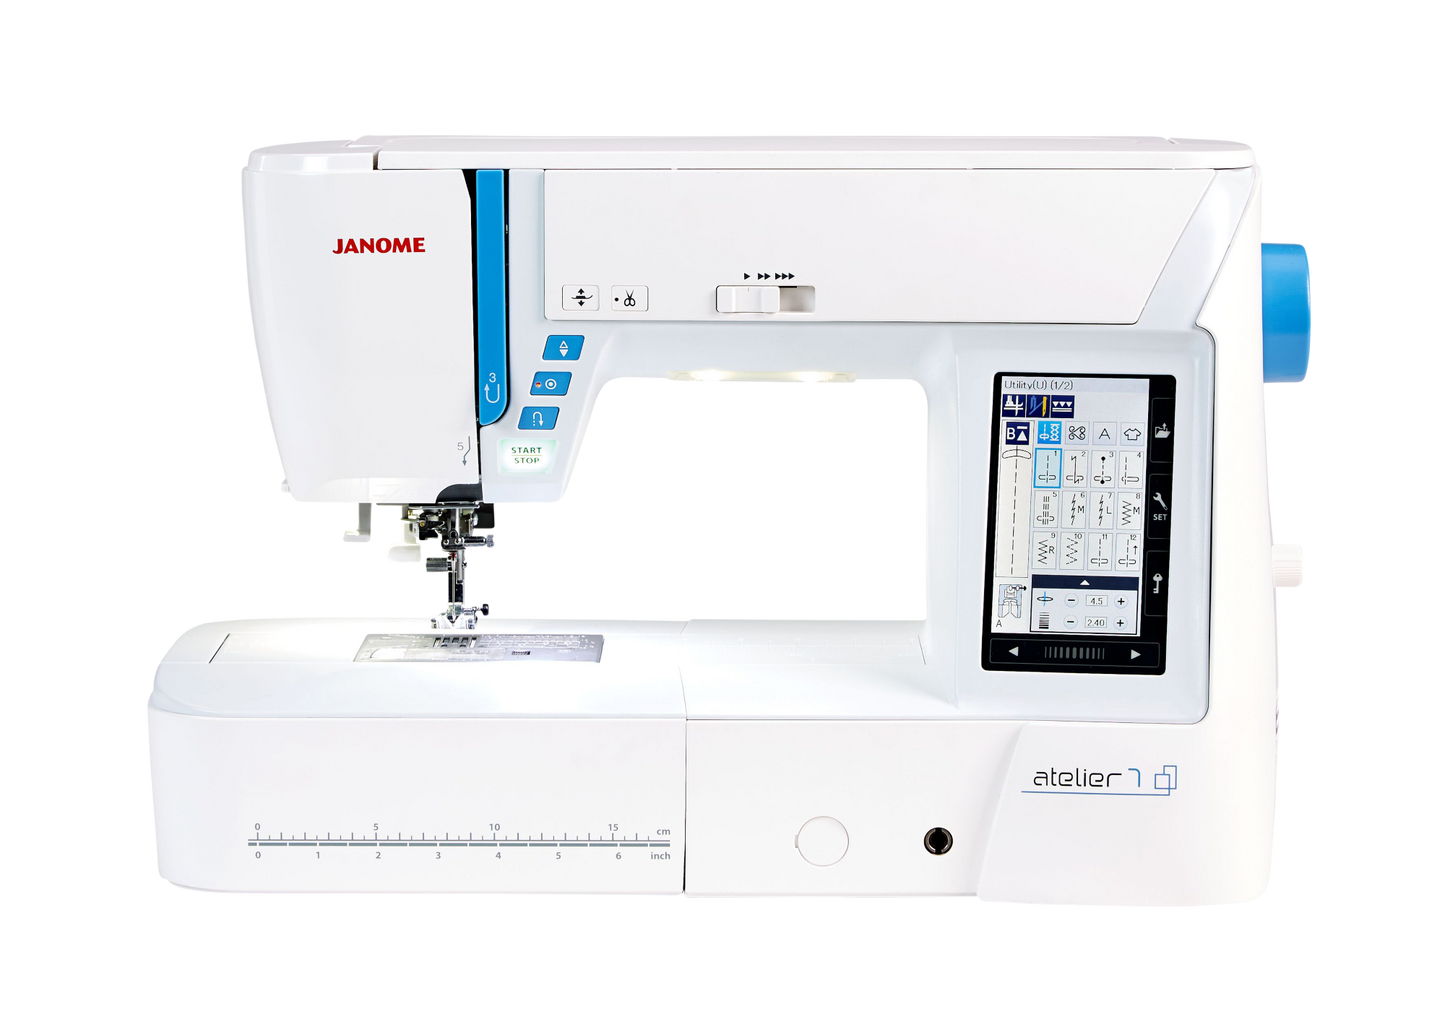 Janome atelier 7 Sewing Machine OUT OF STOCK